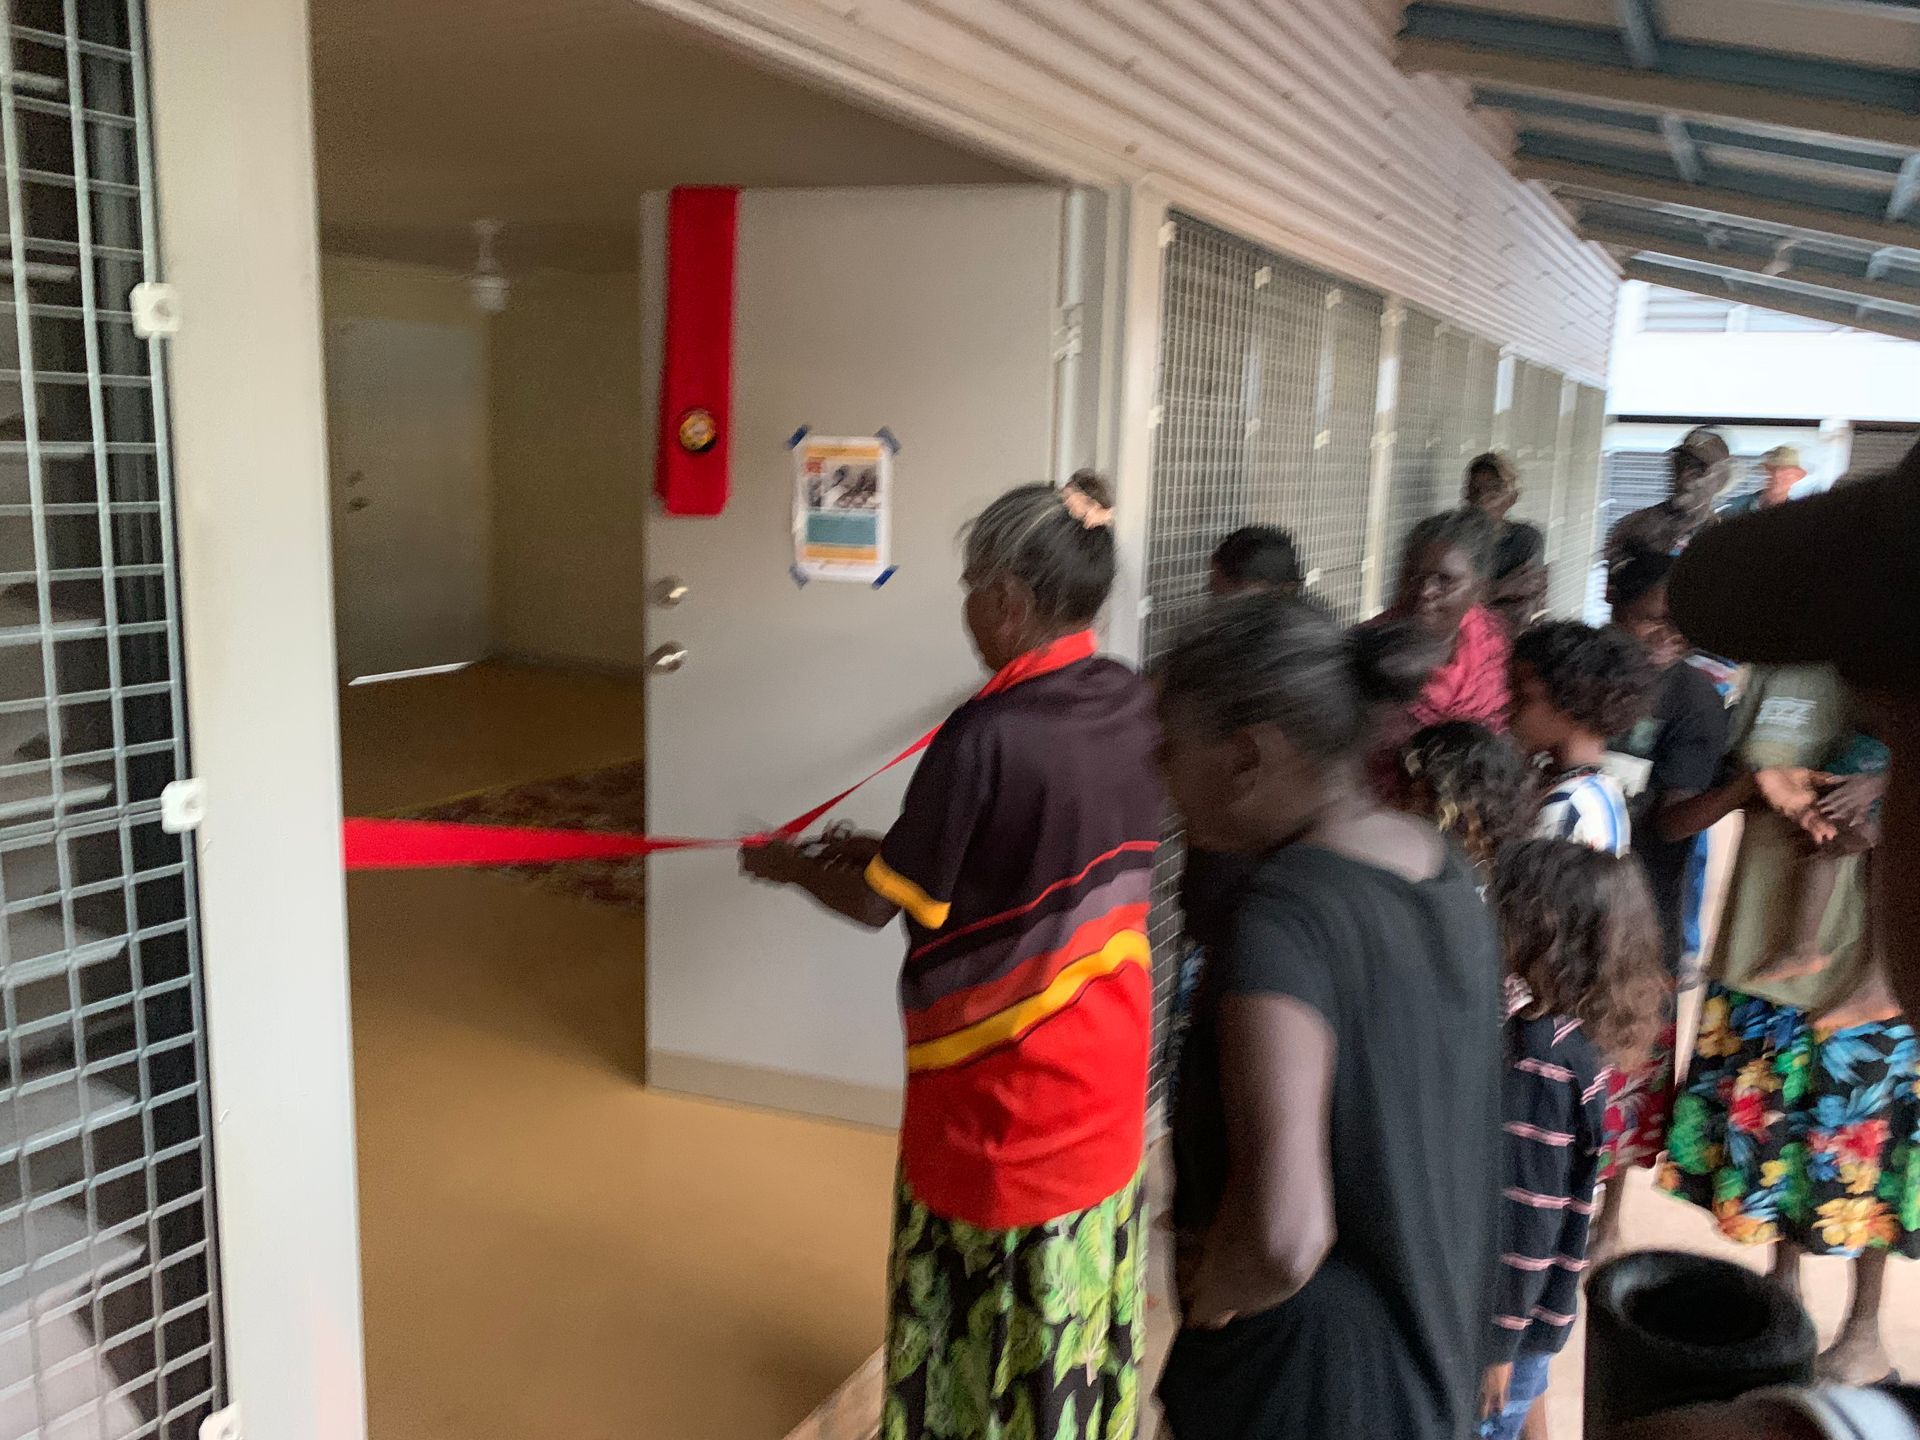 A woman is cutting a red ribbon to open a door.